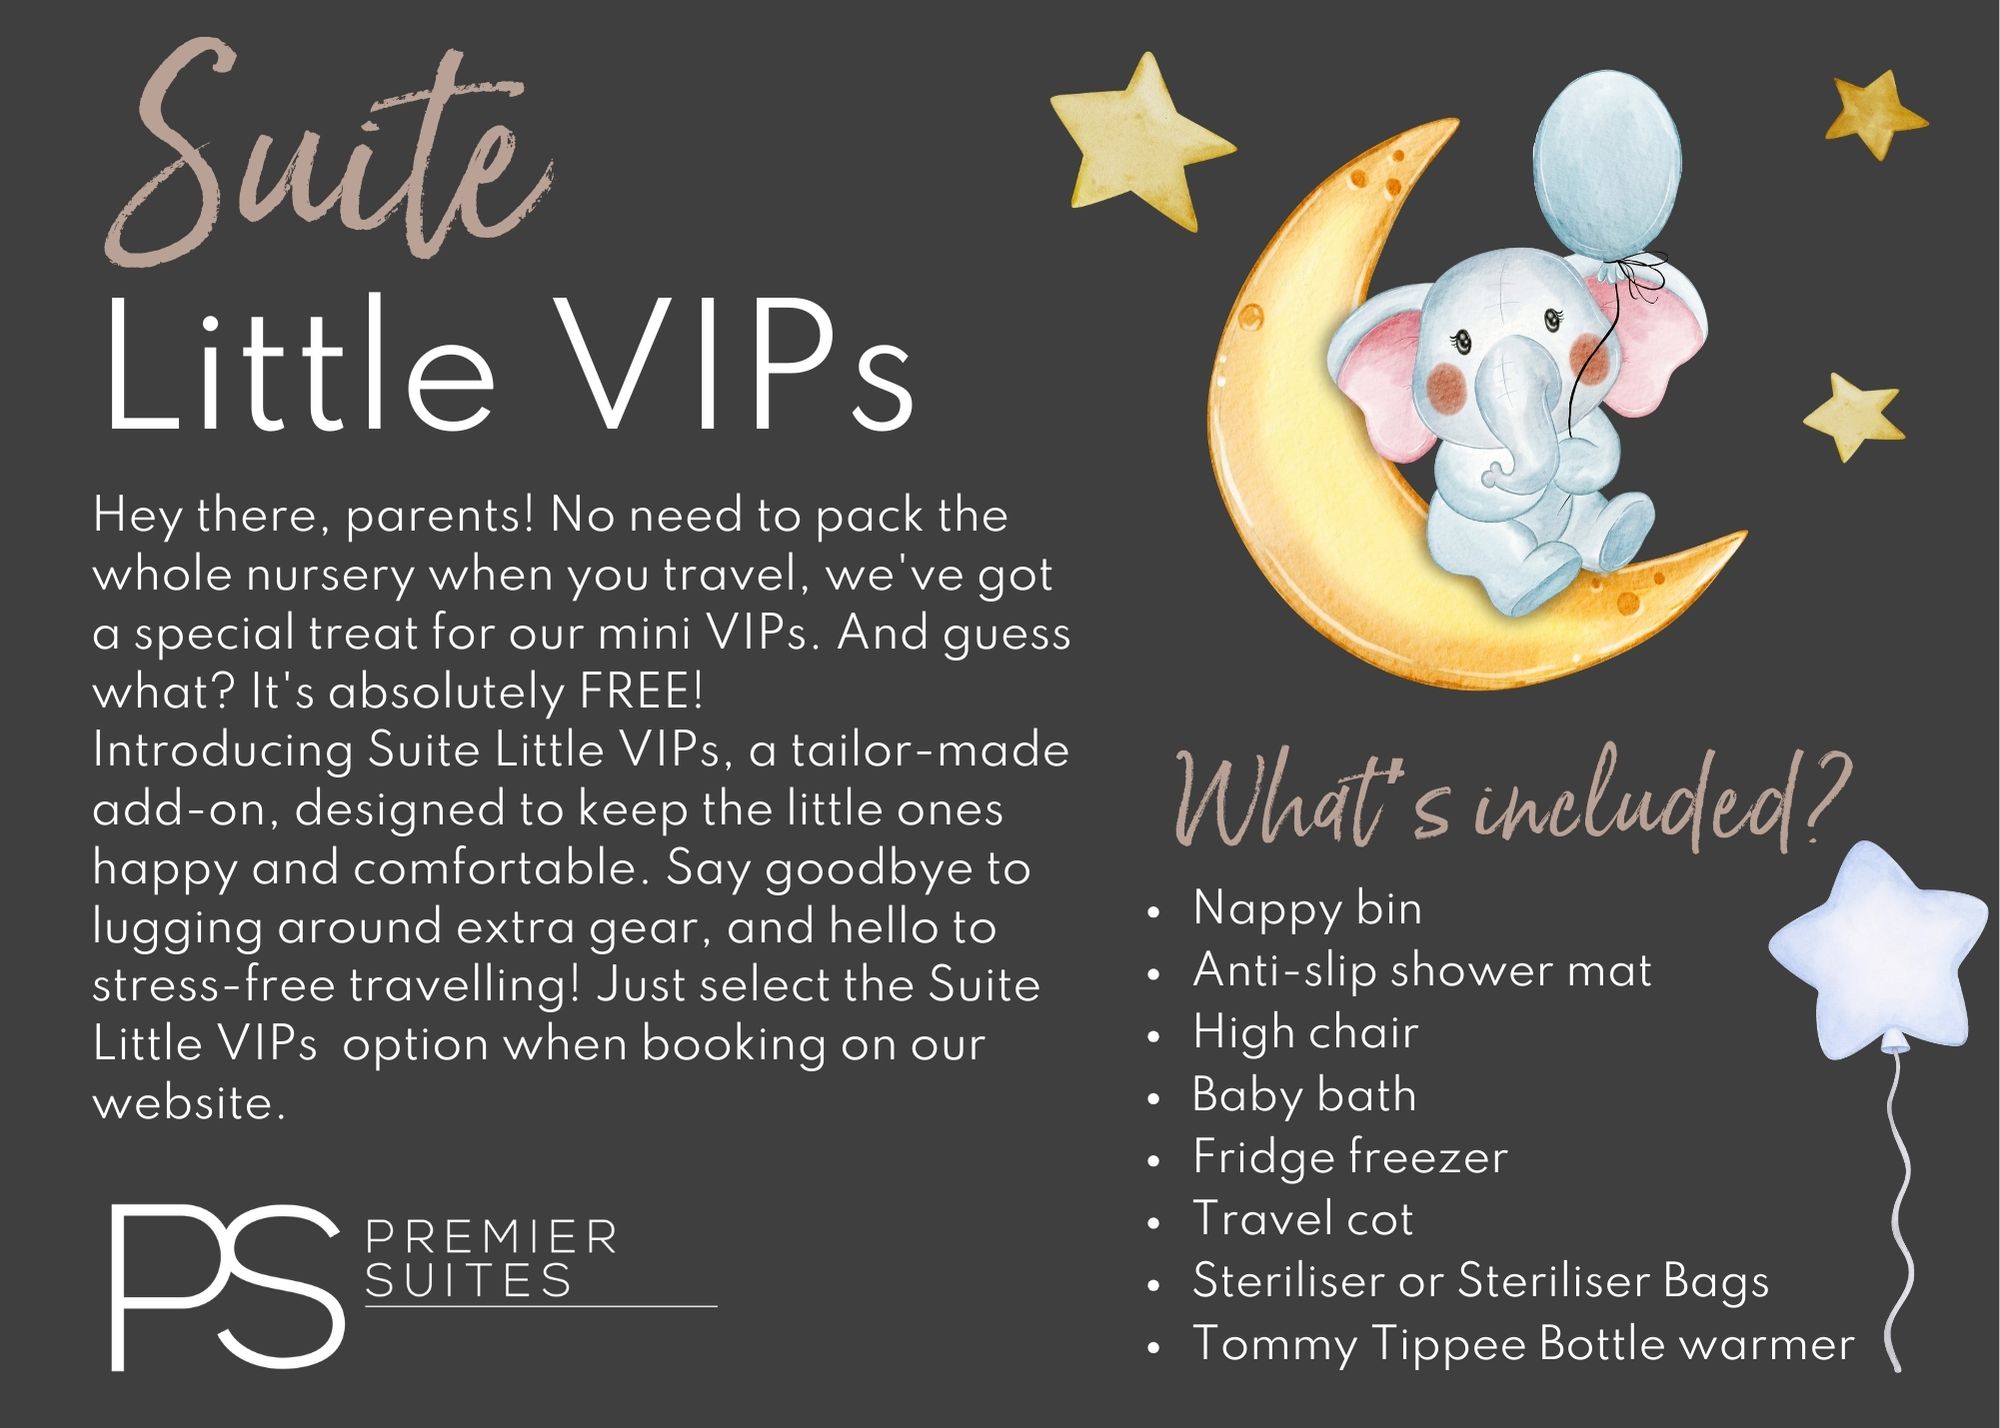 PREMIER SUITES Introduces ‘Suite Little VIPs’ – Tailored Comfort for Your Youngest Travel Companions